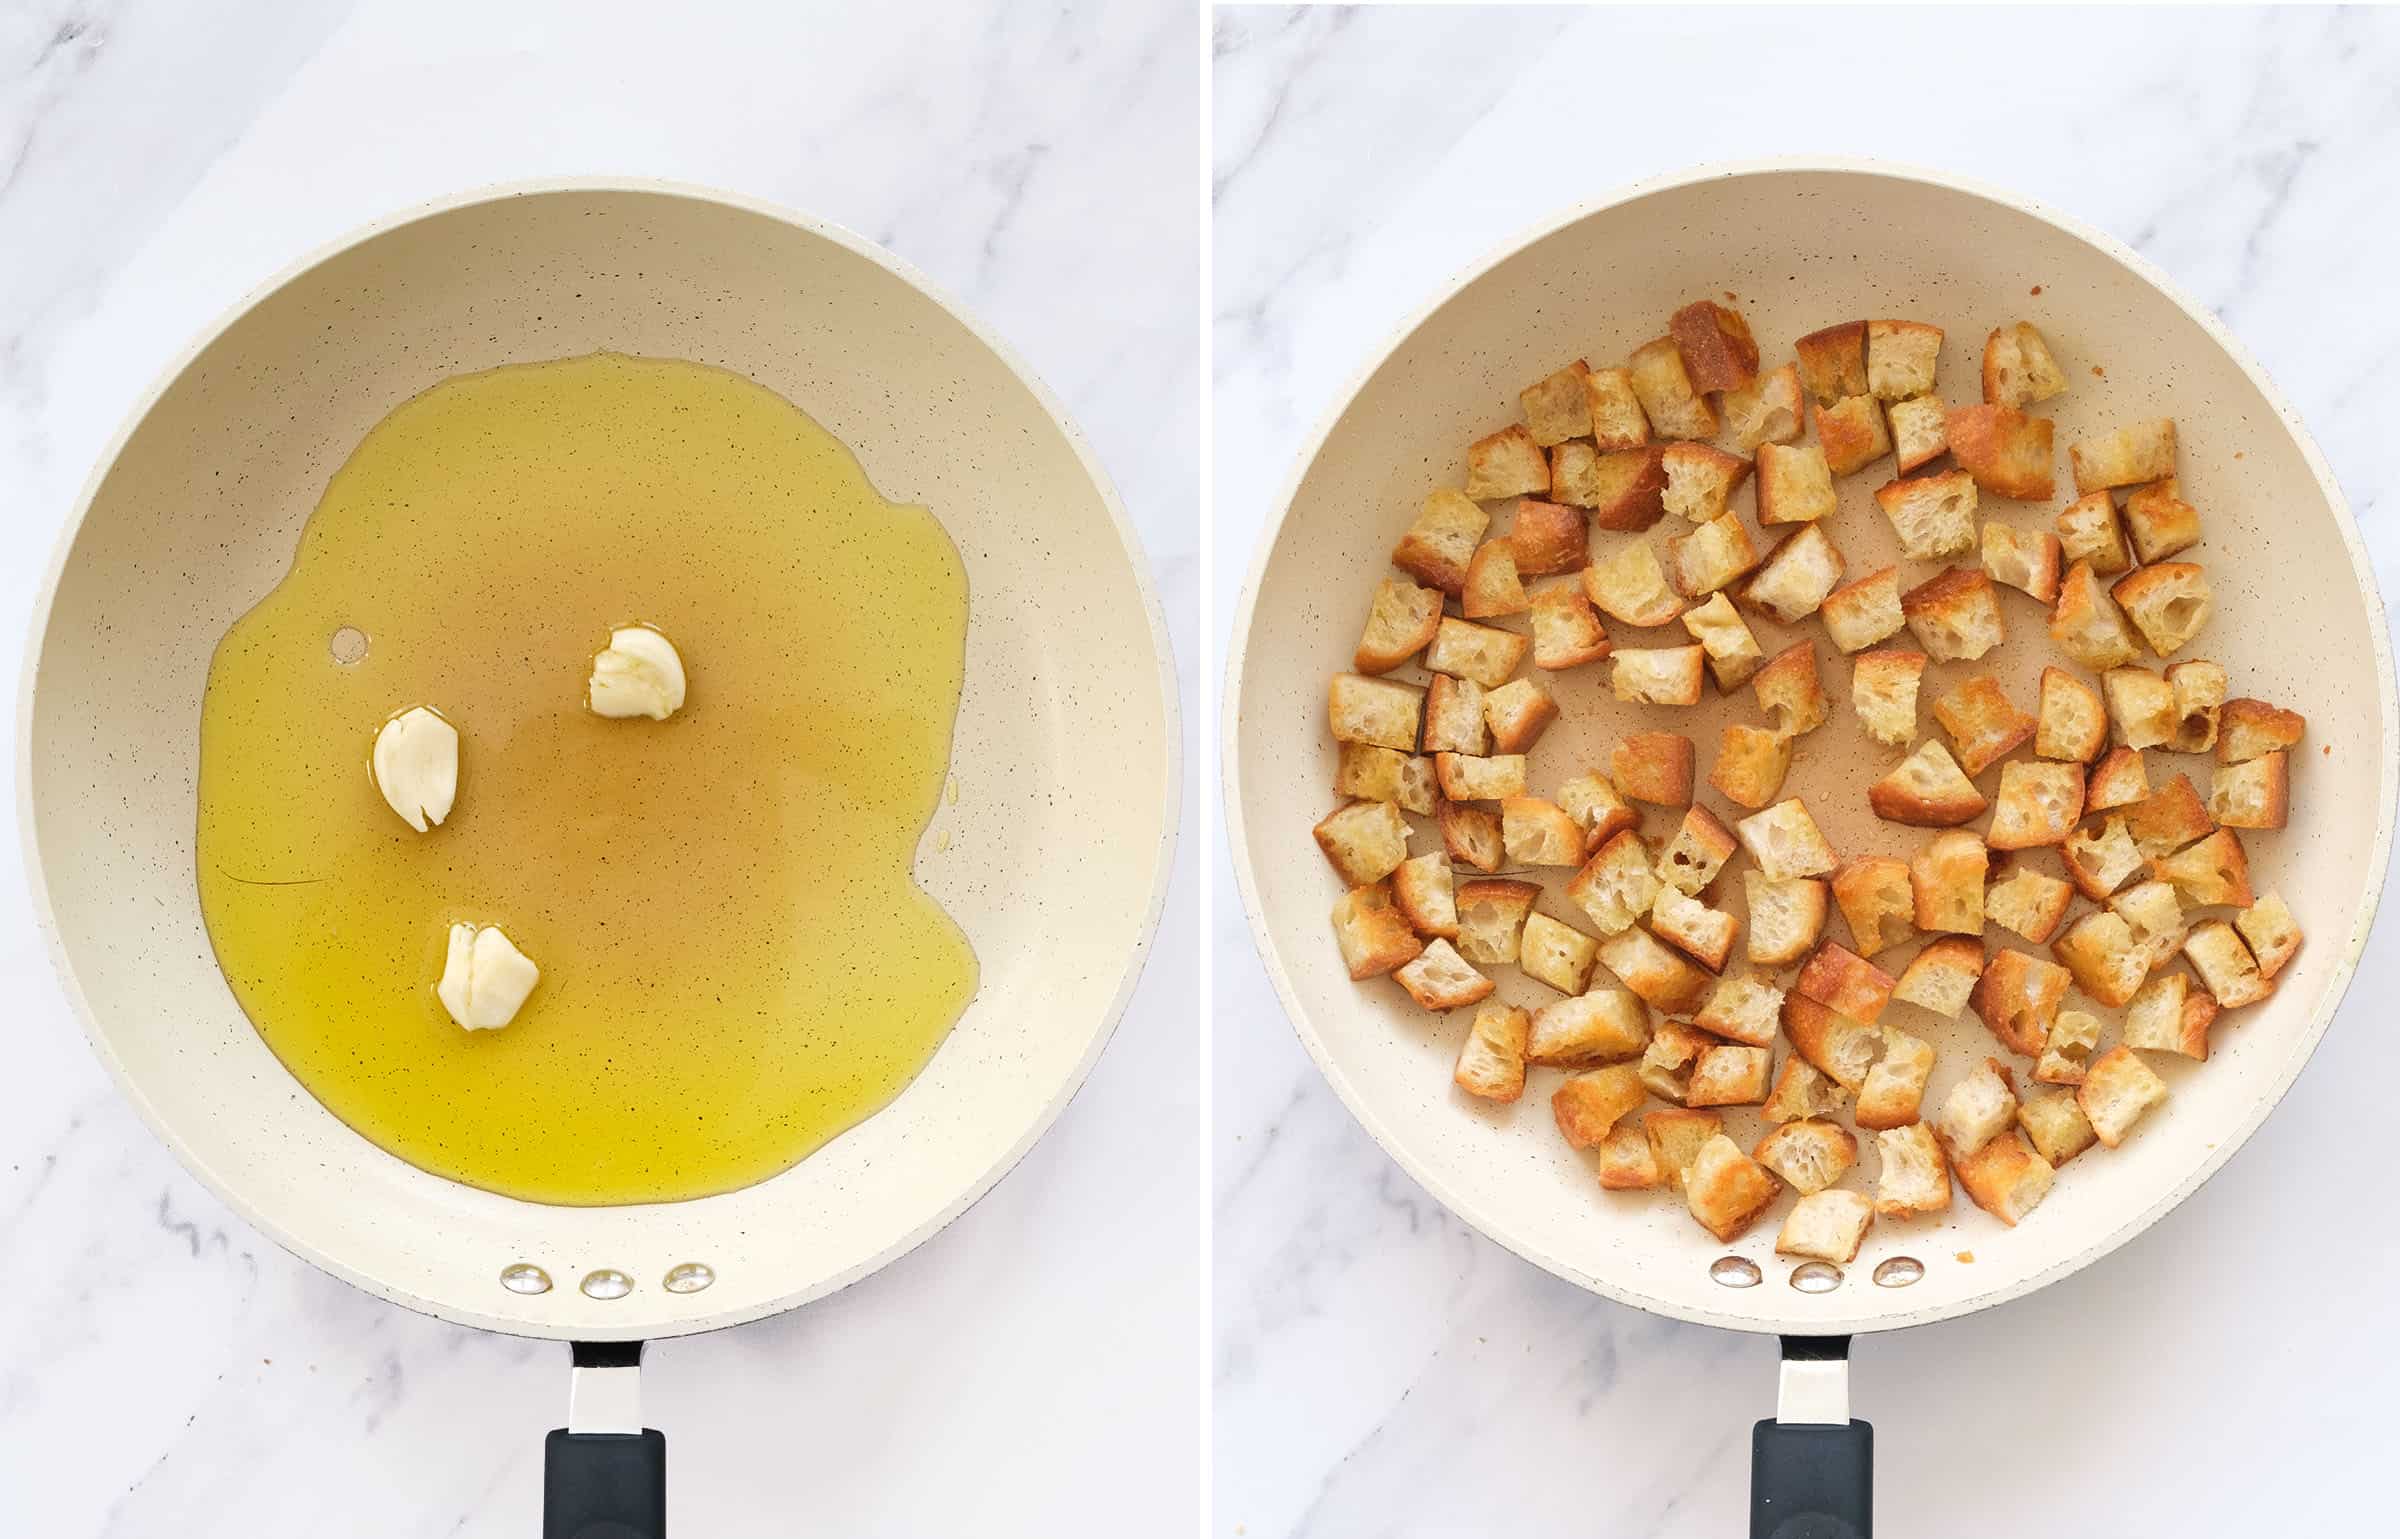 Top view of a white pan with olive oil and croutons over a white background.